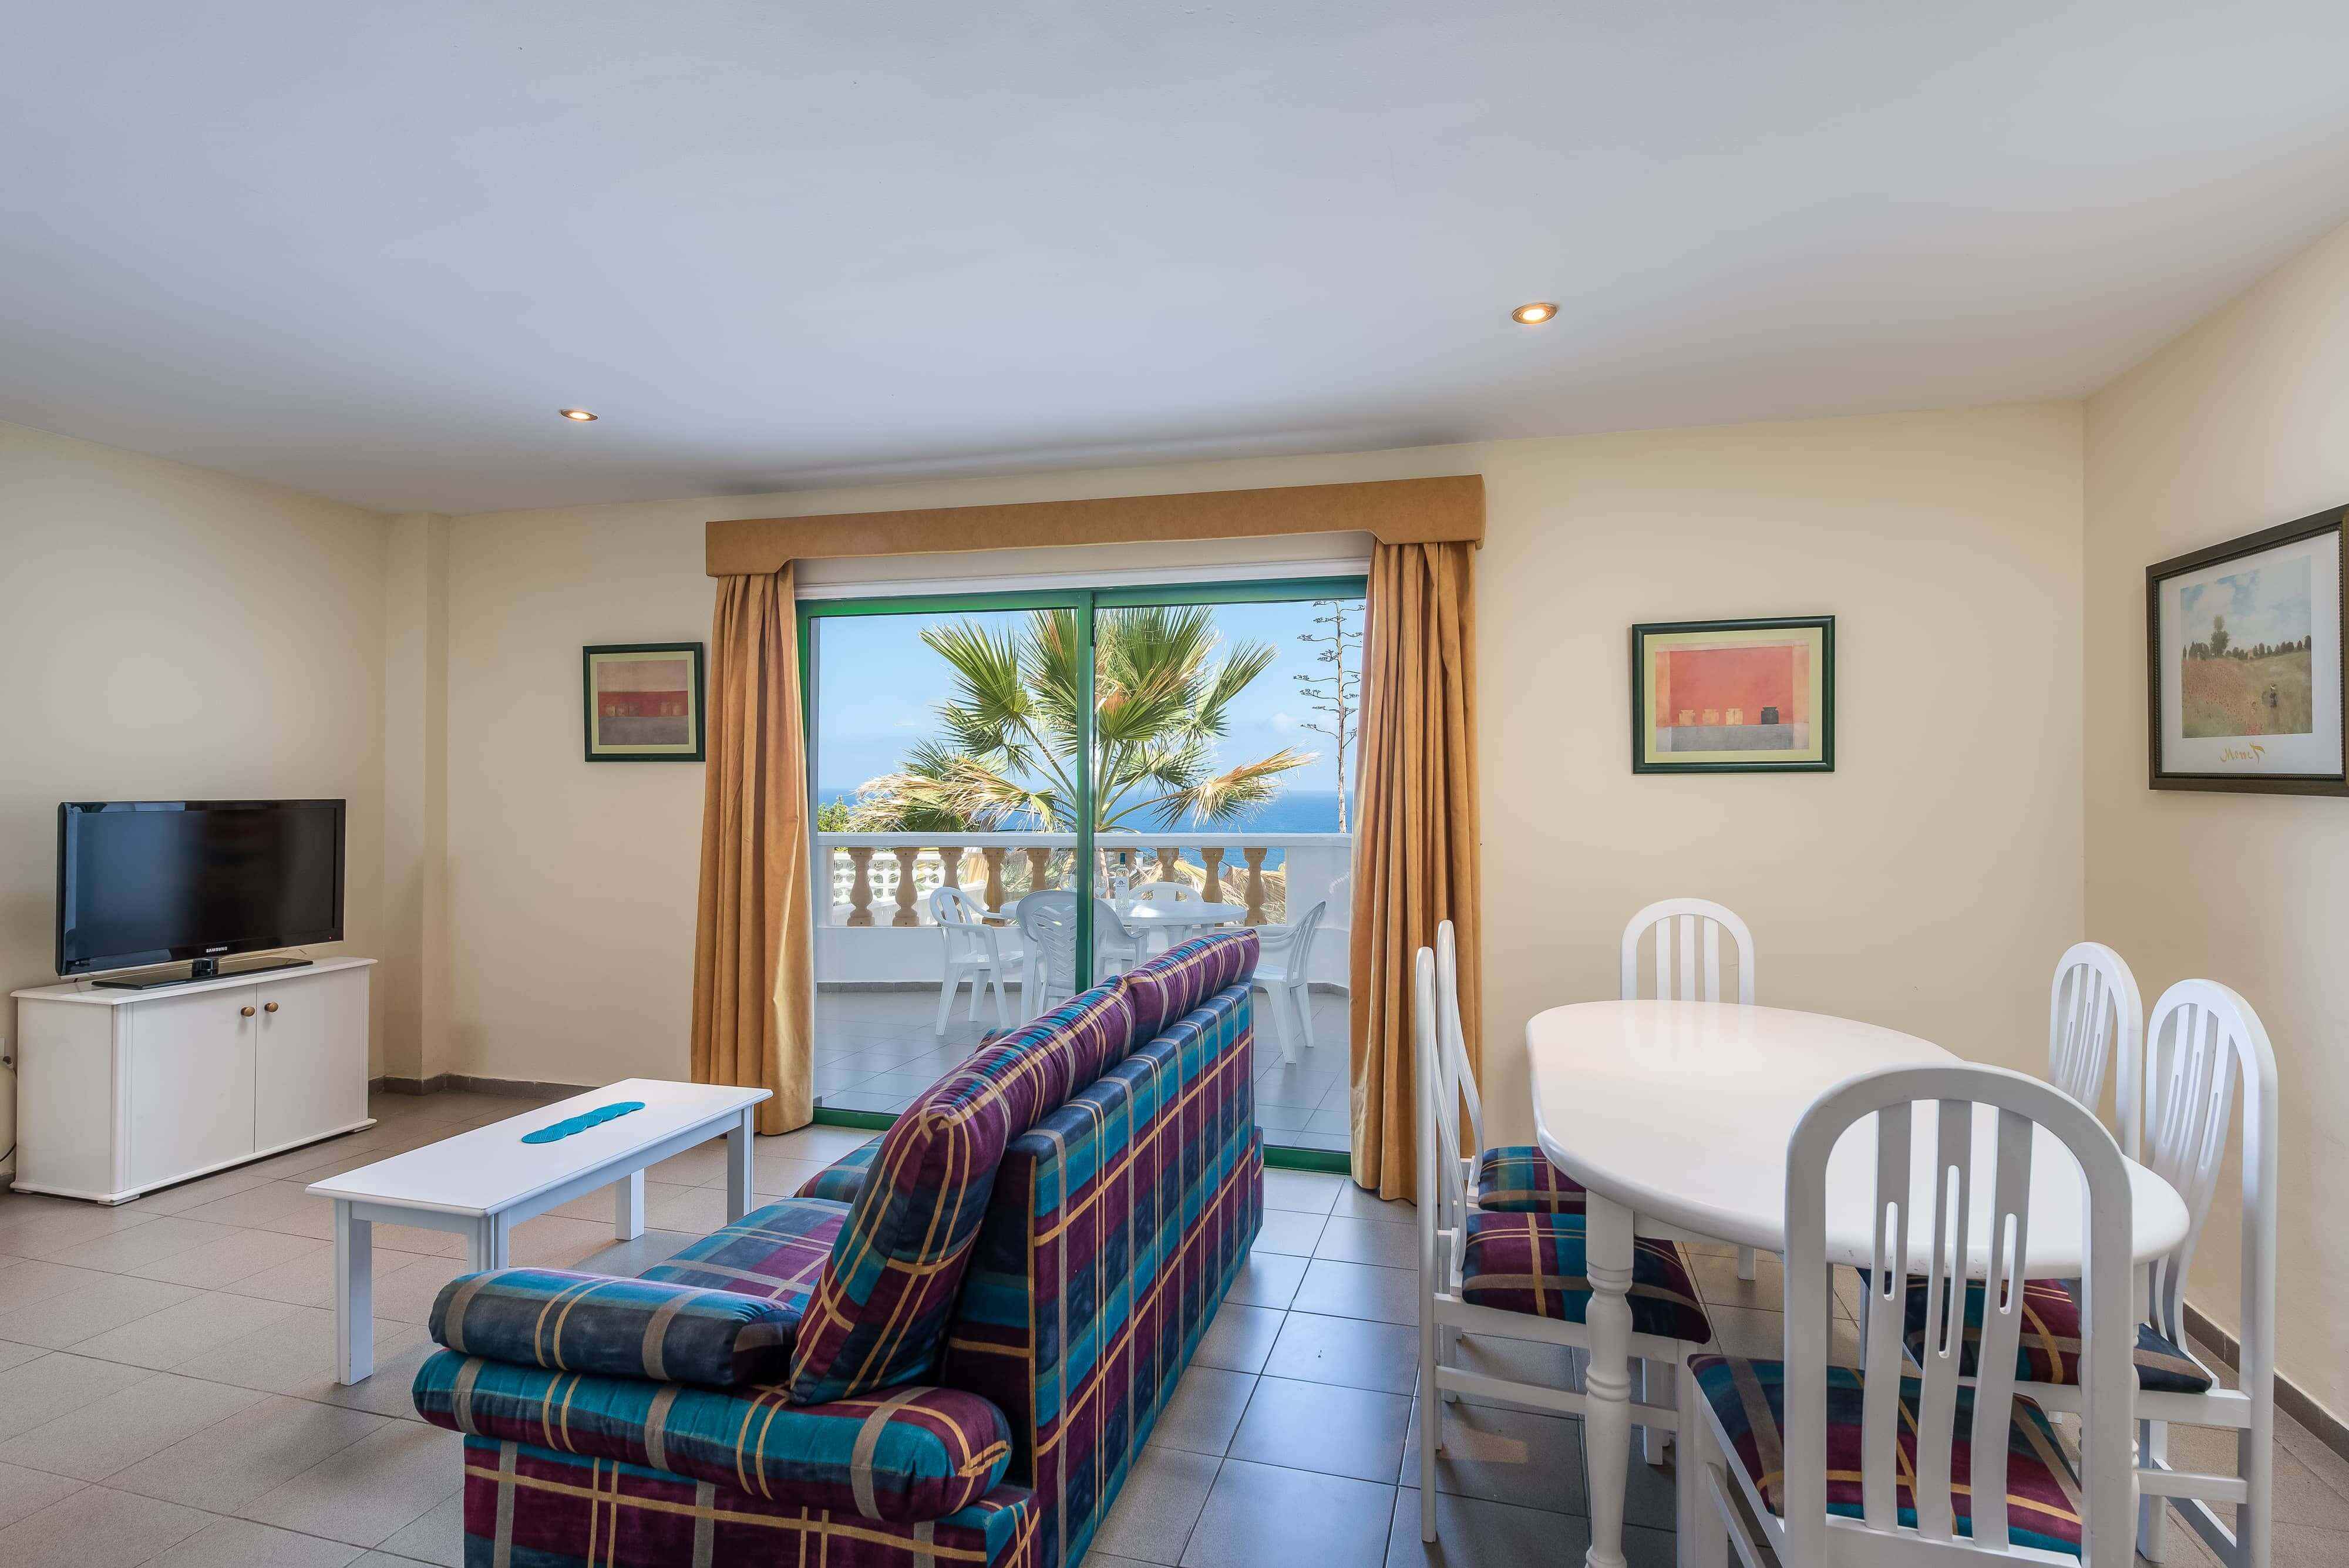 Two- Bed-Room Apartment with Balcony and Sea Views consist of two separate bedrooms, one double and two twins, a large sofa bed in the living area, a private bathroom and a modern fully-fitted kitchen